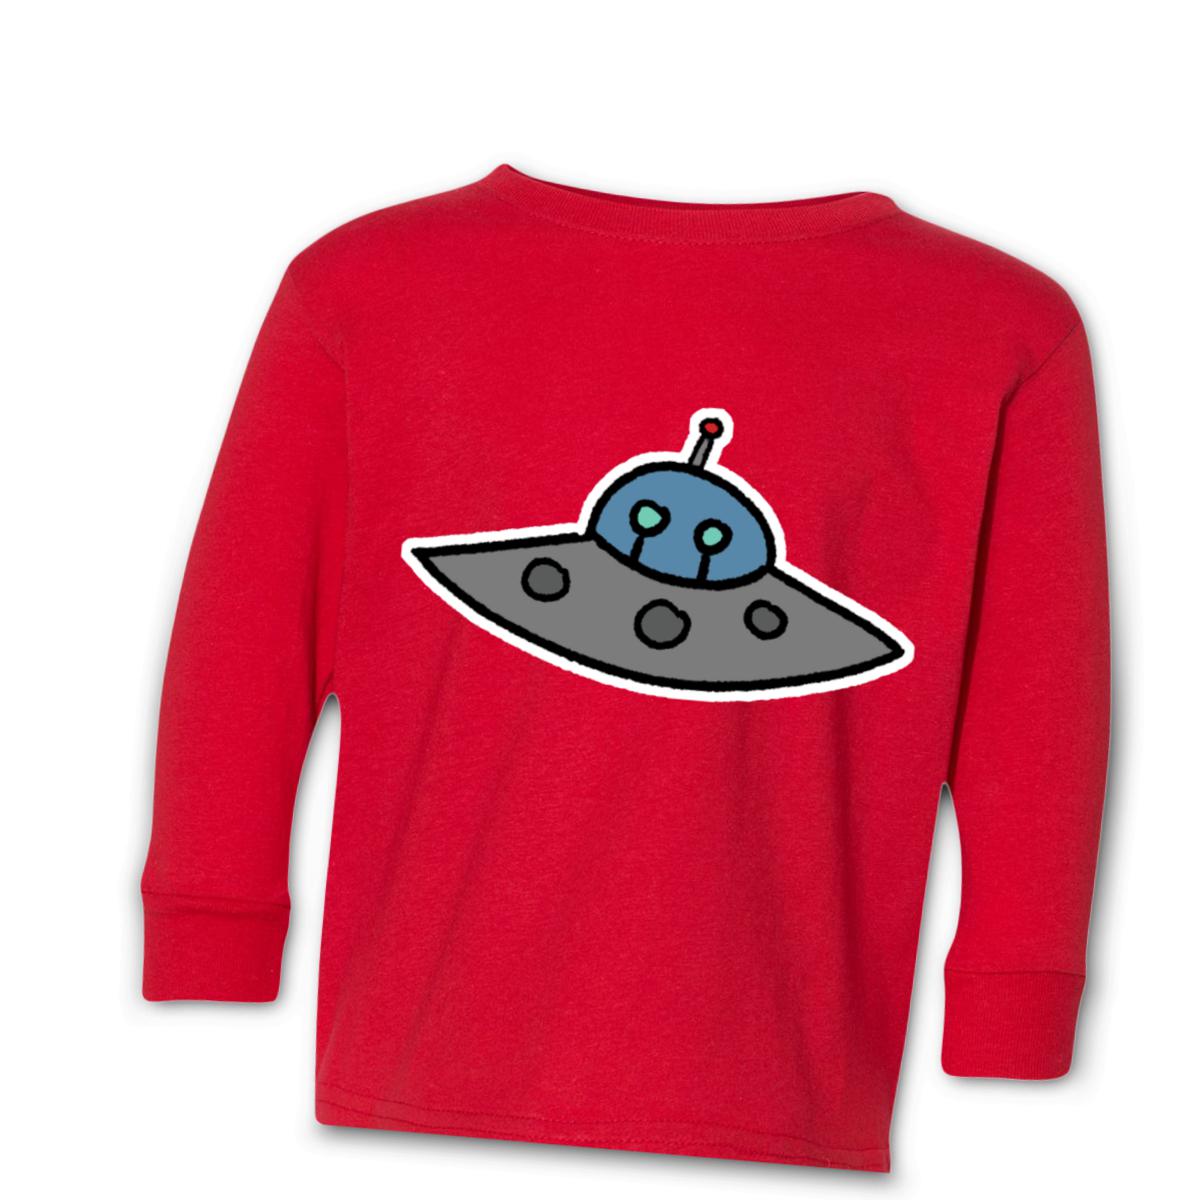 Flying Saucer Kid's Long Sleeve Tee Large red